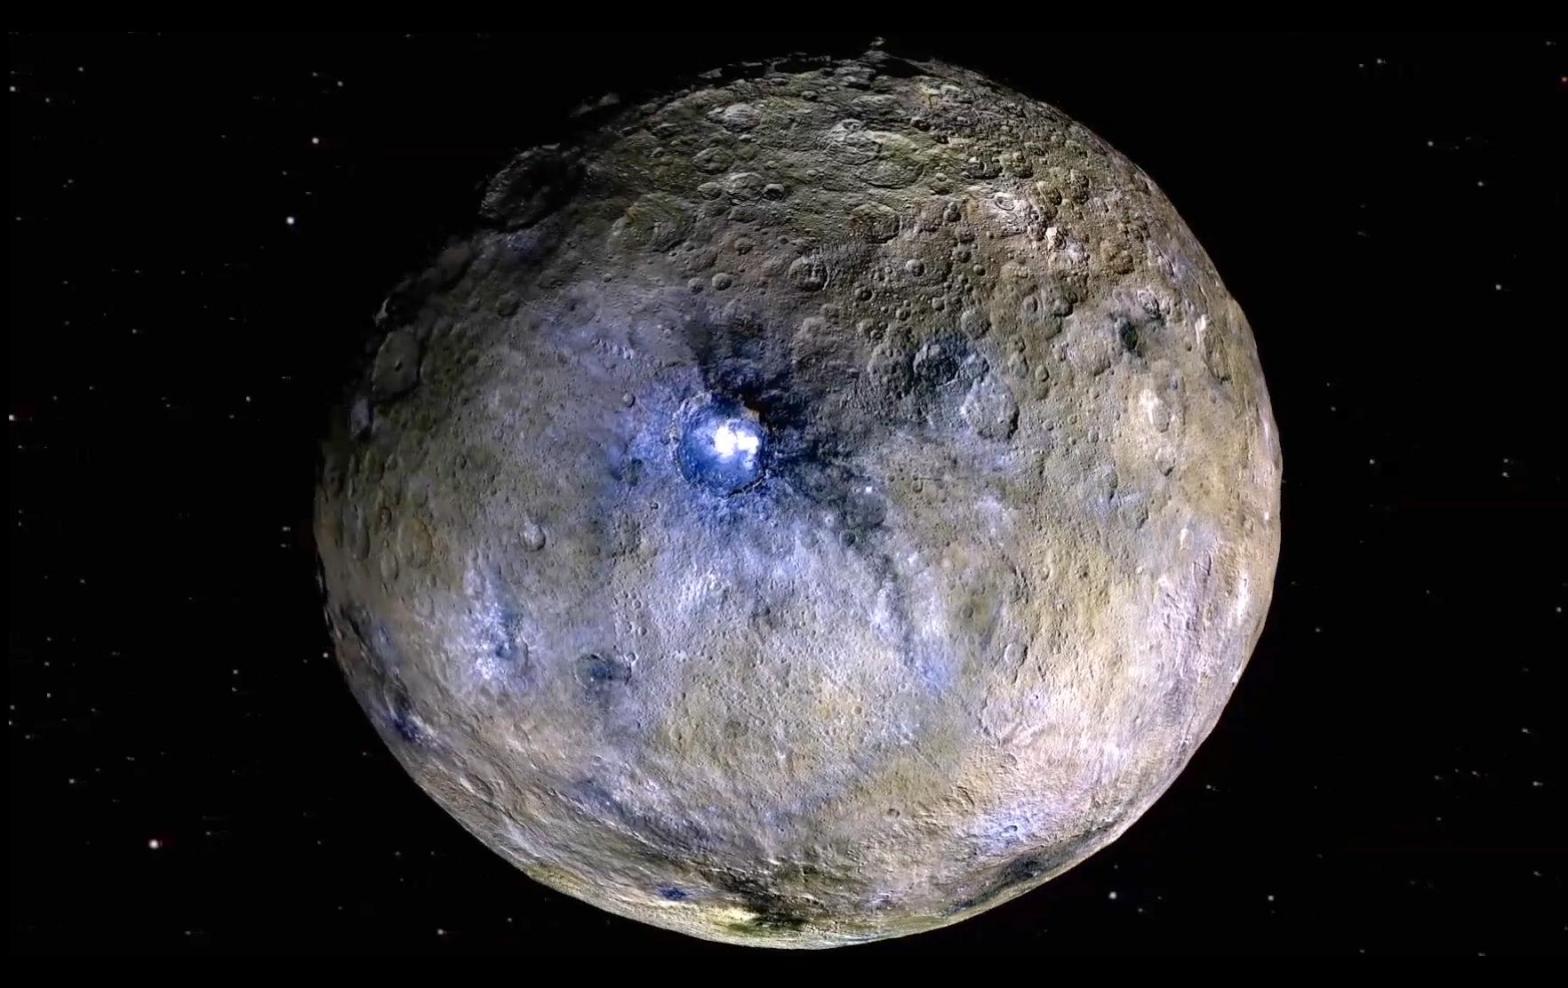 Dwarf planet Ceres shown in false colour, with Occator Crater visible. (Image: NASA/JPL-CalTech/UCLA/MPS/DLR/IDA)